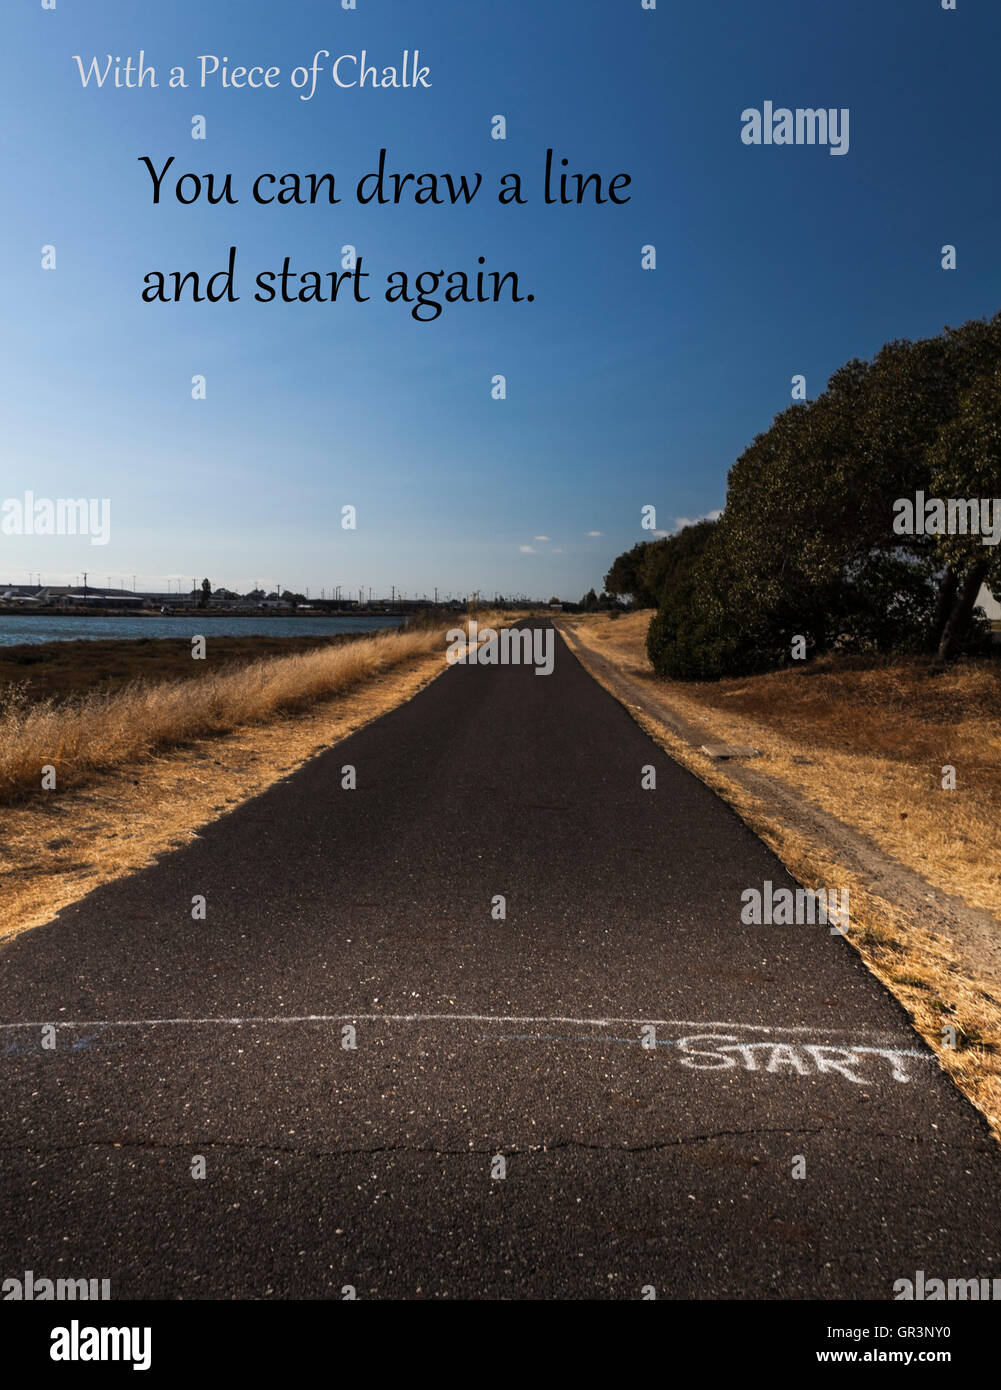 START in chalk on a paved path with added text: 'With a Piece of Chalk - You can draw a line and start again.' Stock Photo